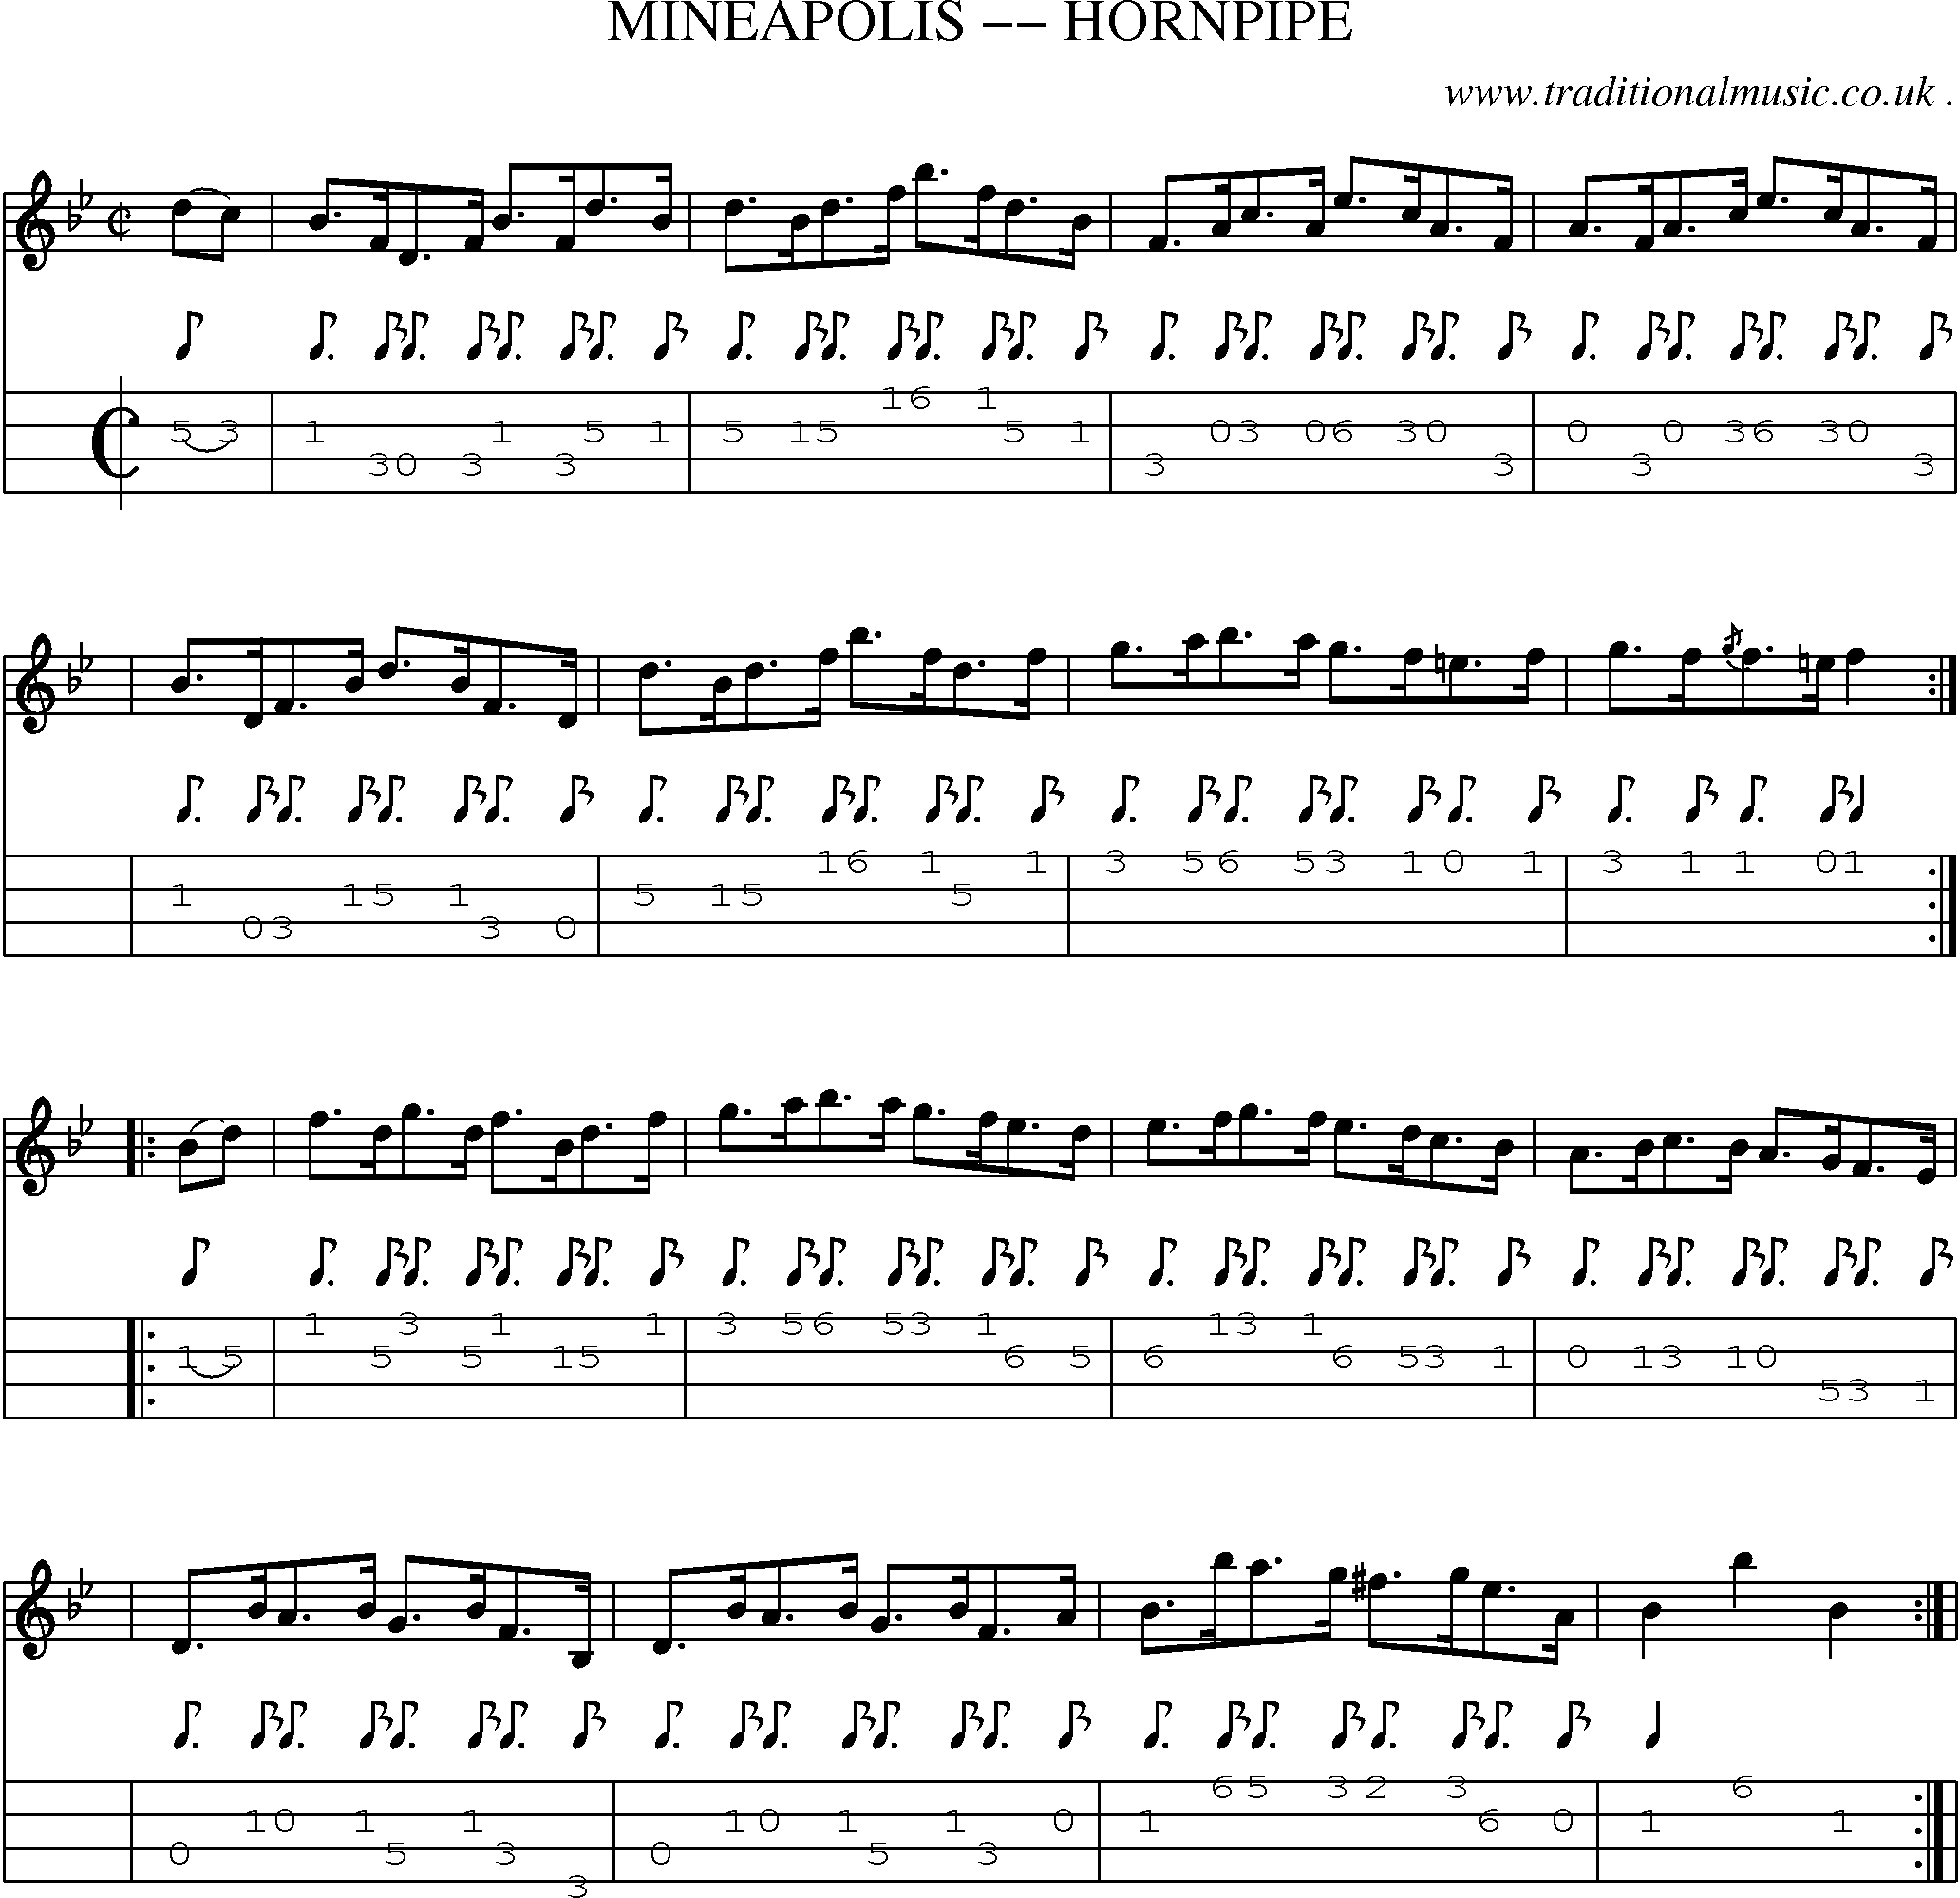 Music Score and Guitar Tabs for Mineapolis Hornpipe